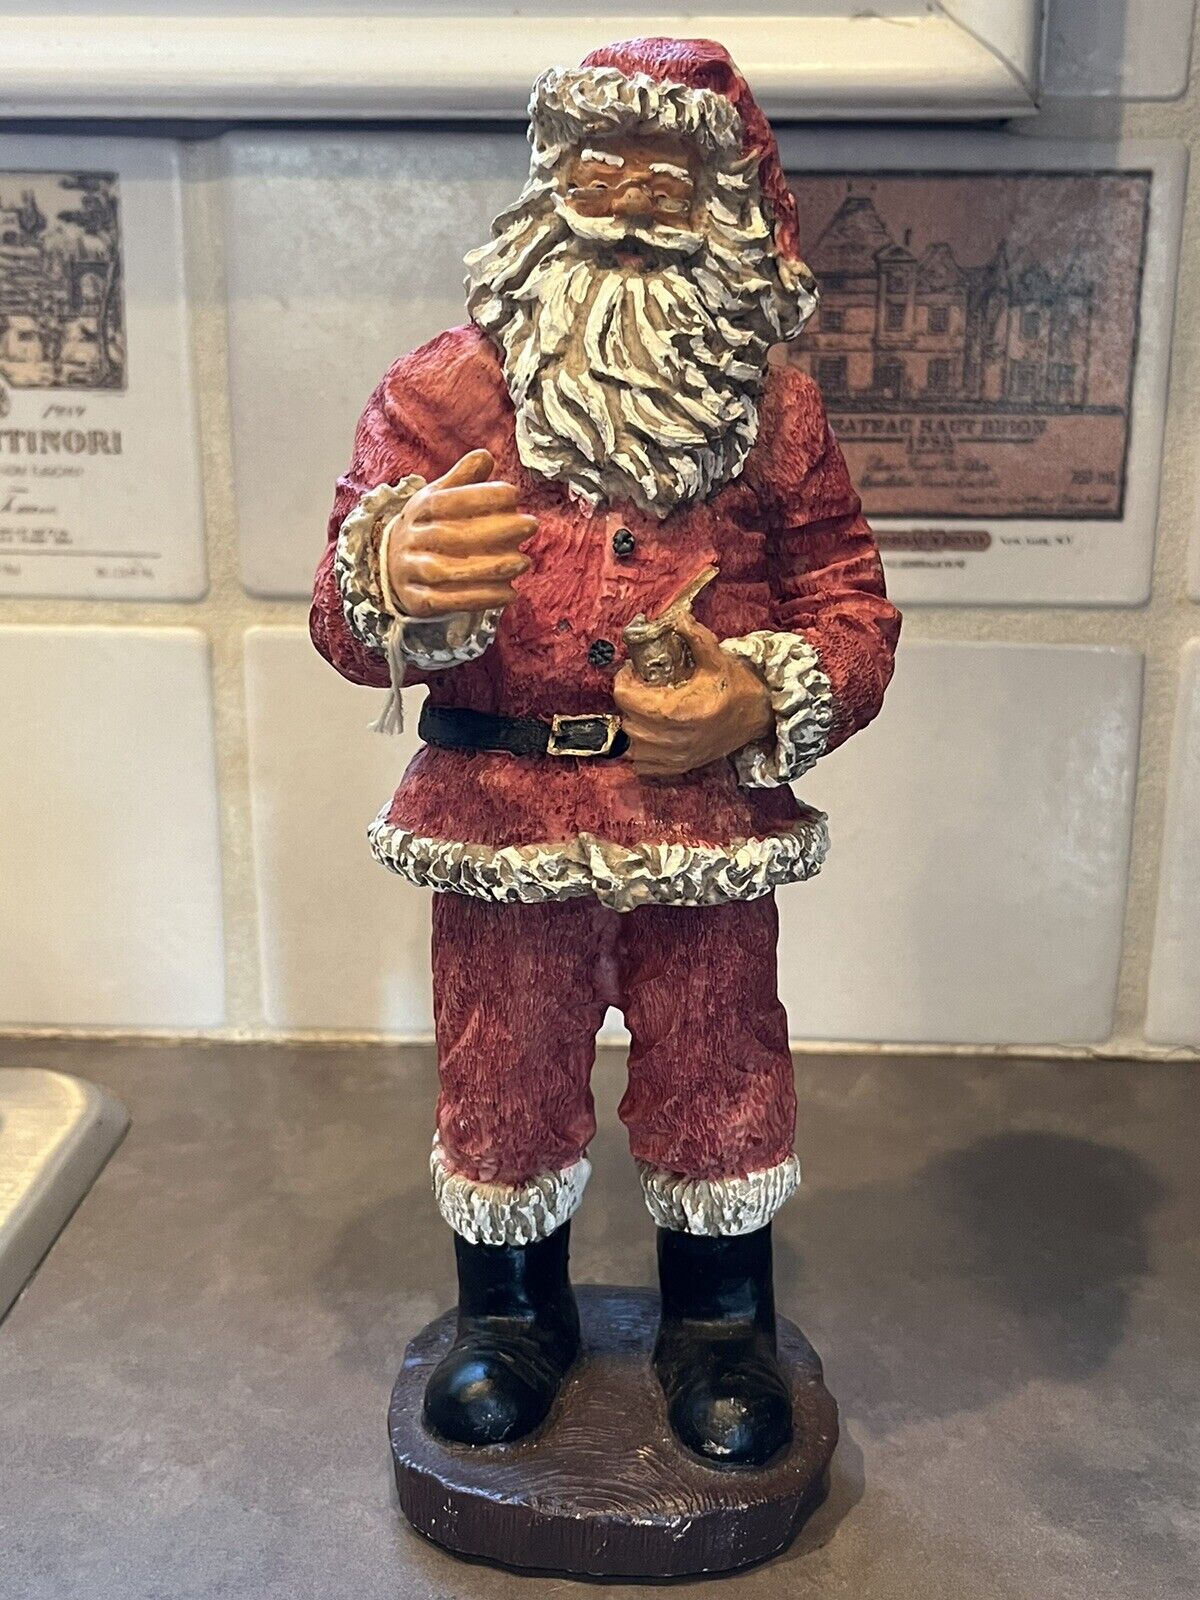 Windsor Collection Tall Heavy Santa with Pipe in Hand Collectable Figurine